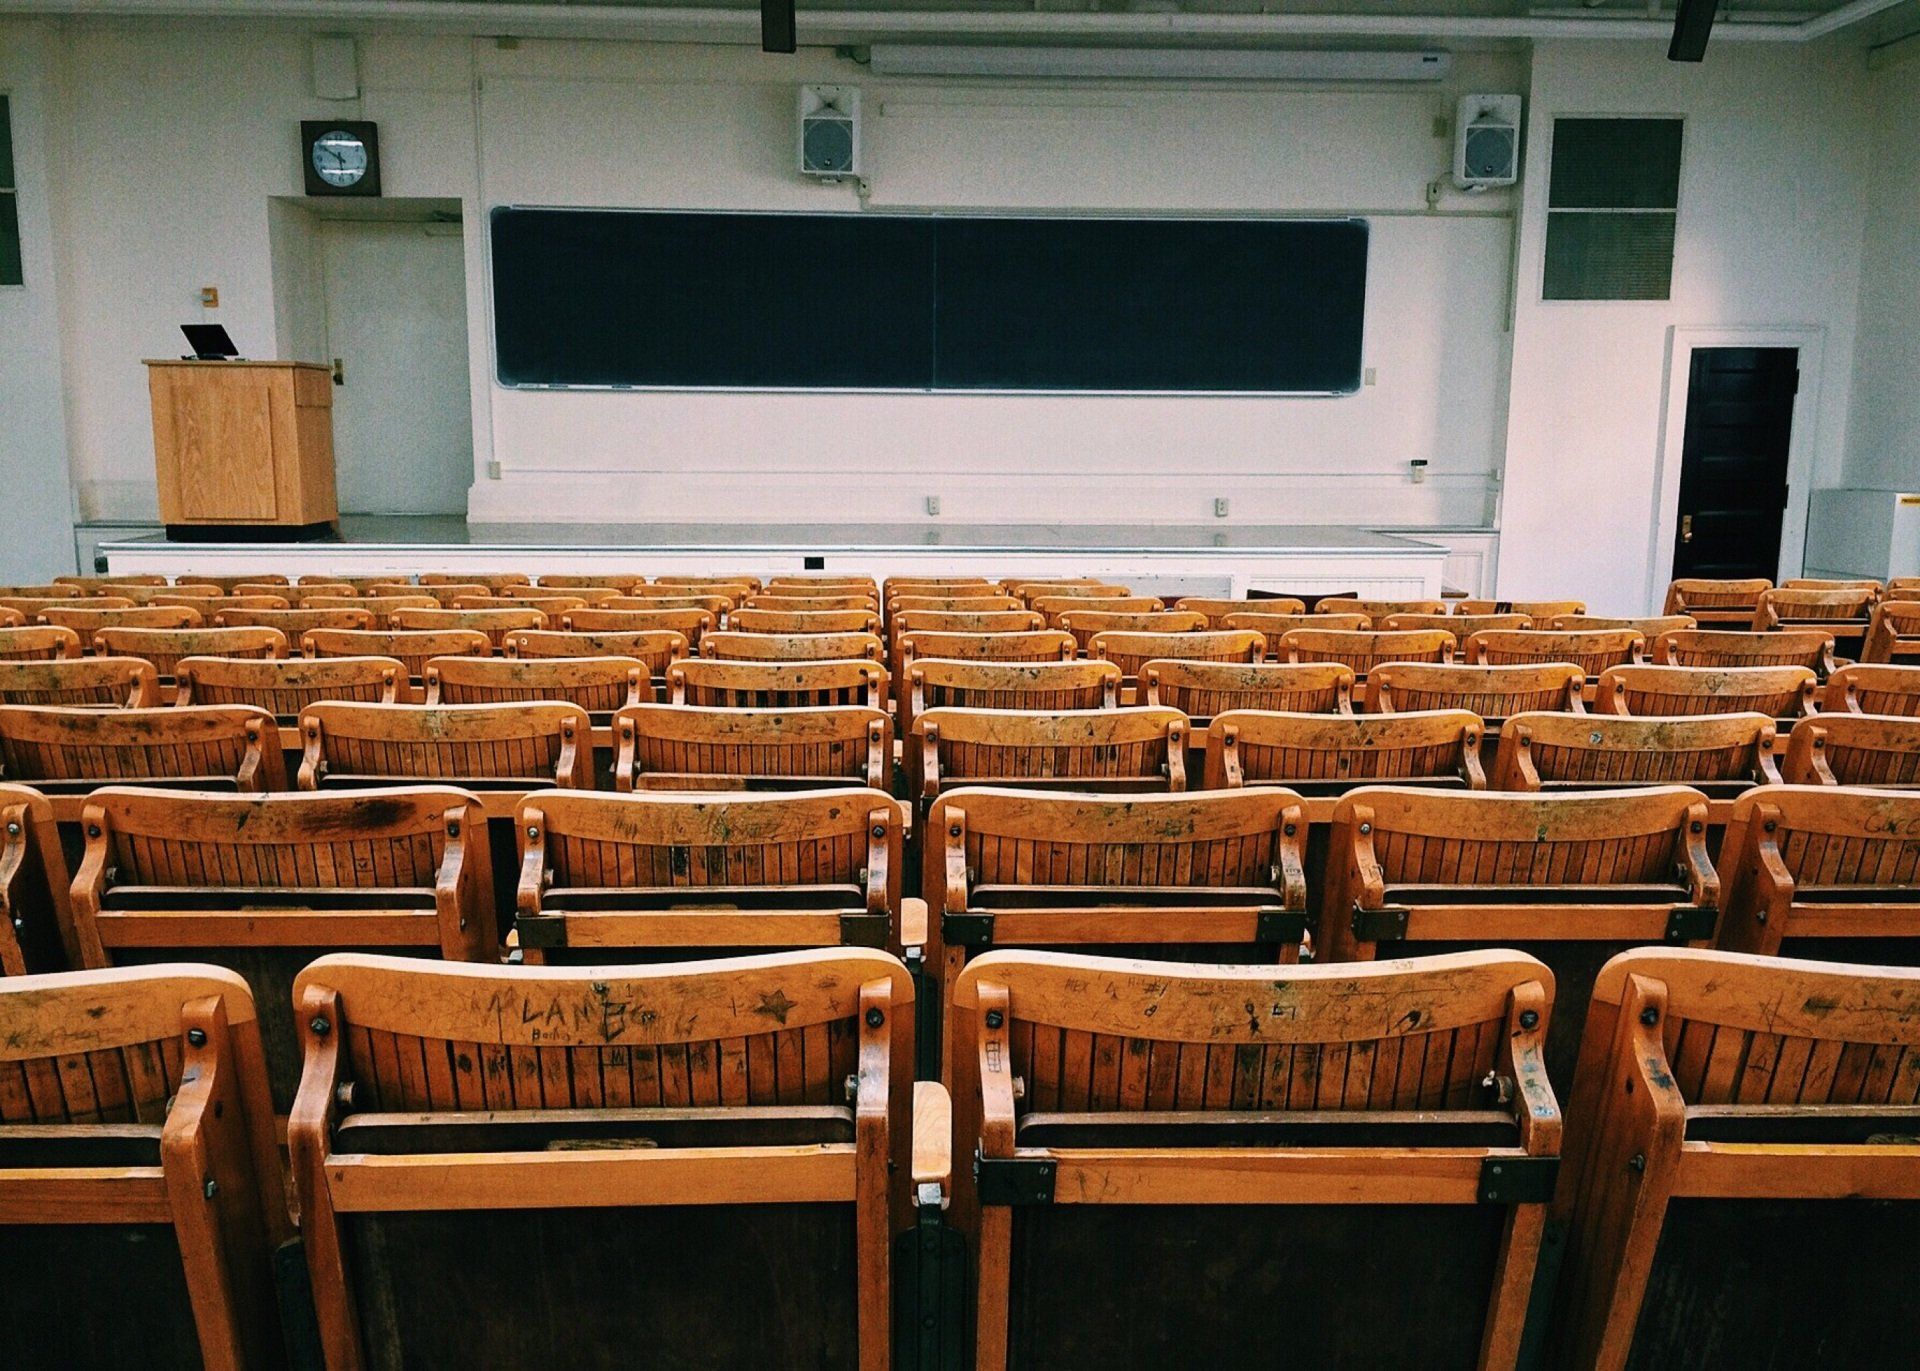 Rows of wooden chairs in an auditorium with a blackboard in the background waiting for a legal services